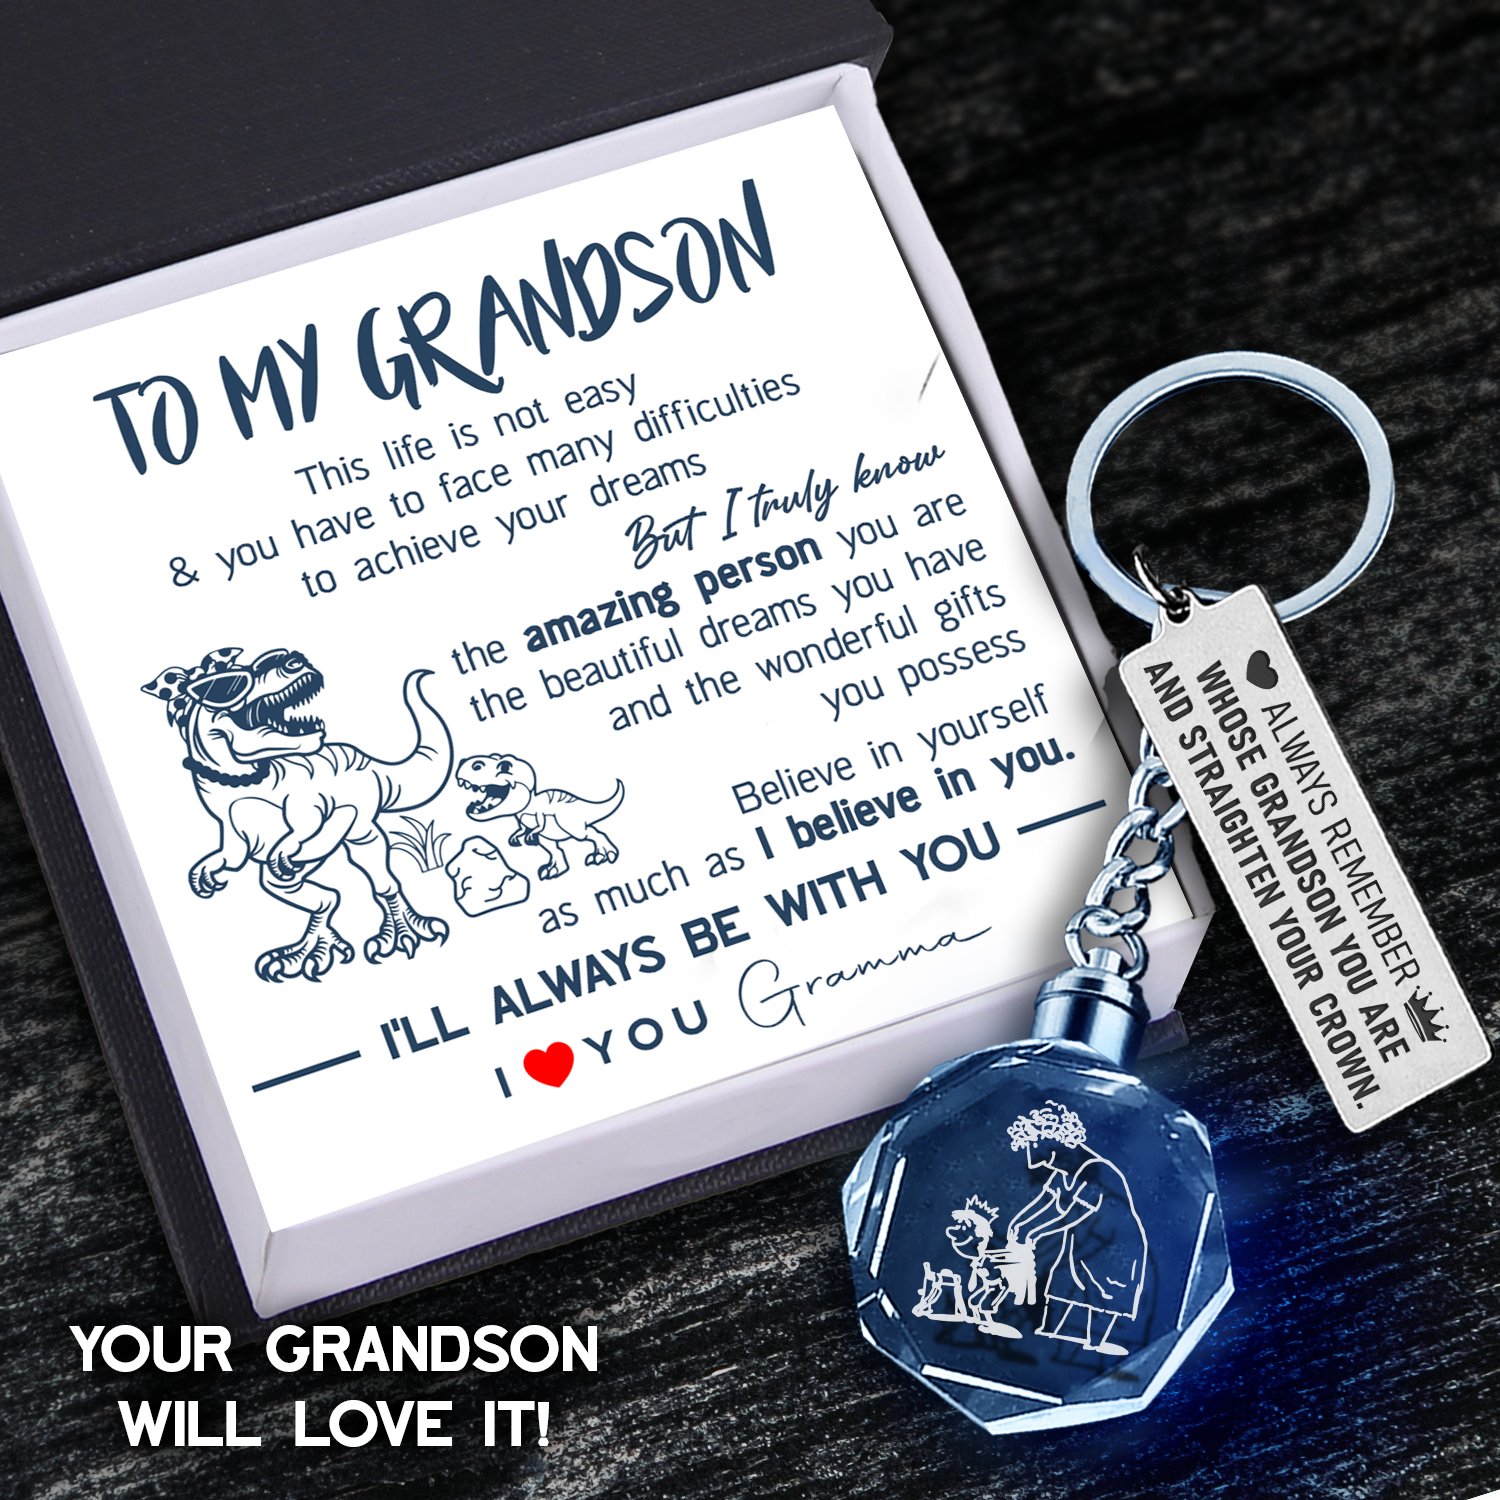 Led Light Keychain - Family - To My Grandson - Believe In Yourself As Much As I Believe In You - Ukgkwl22003